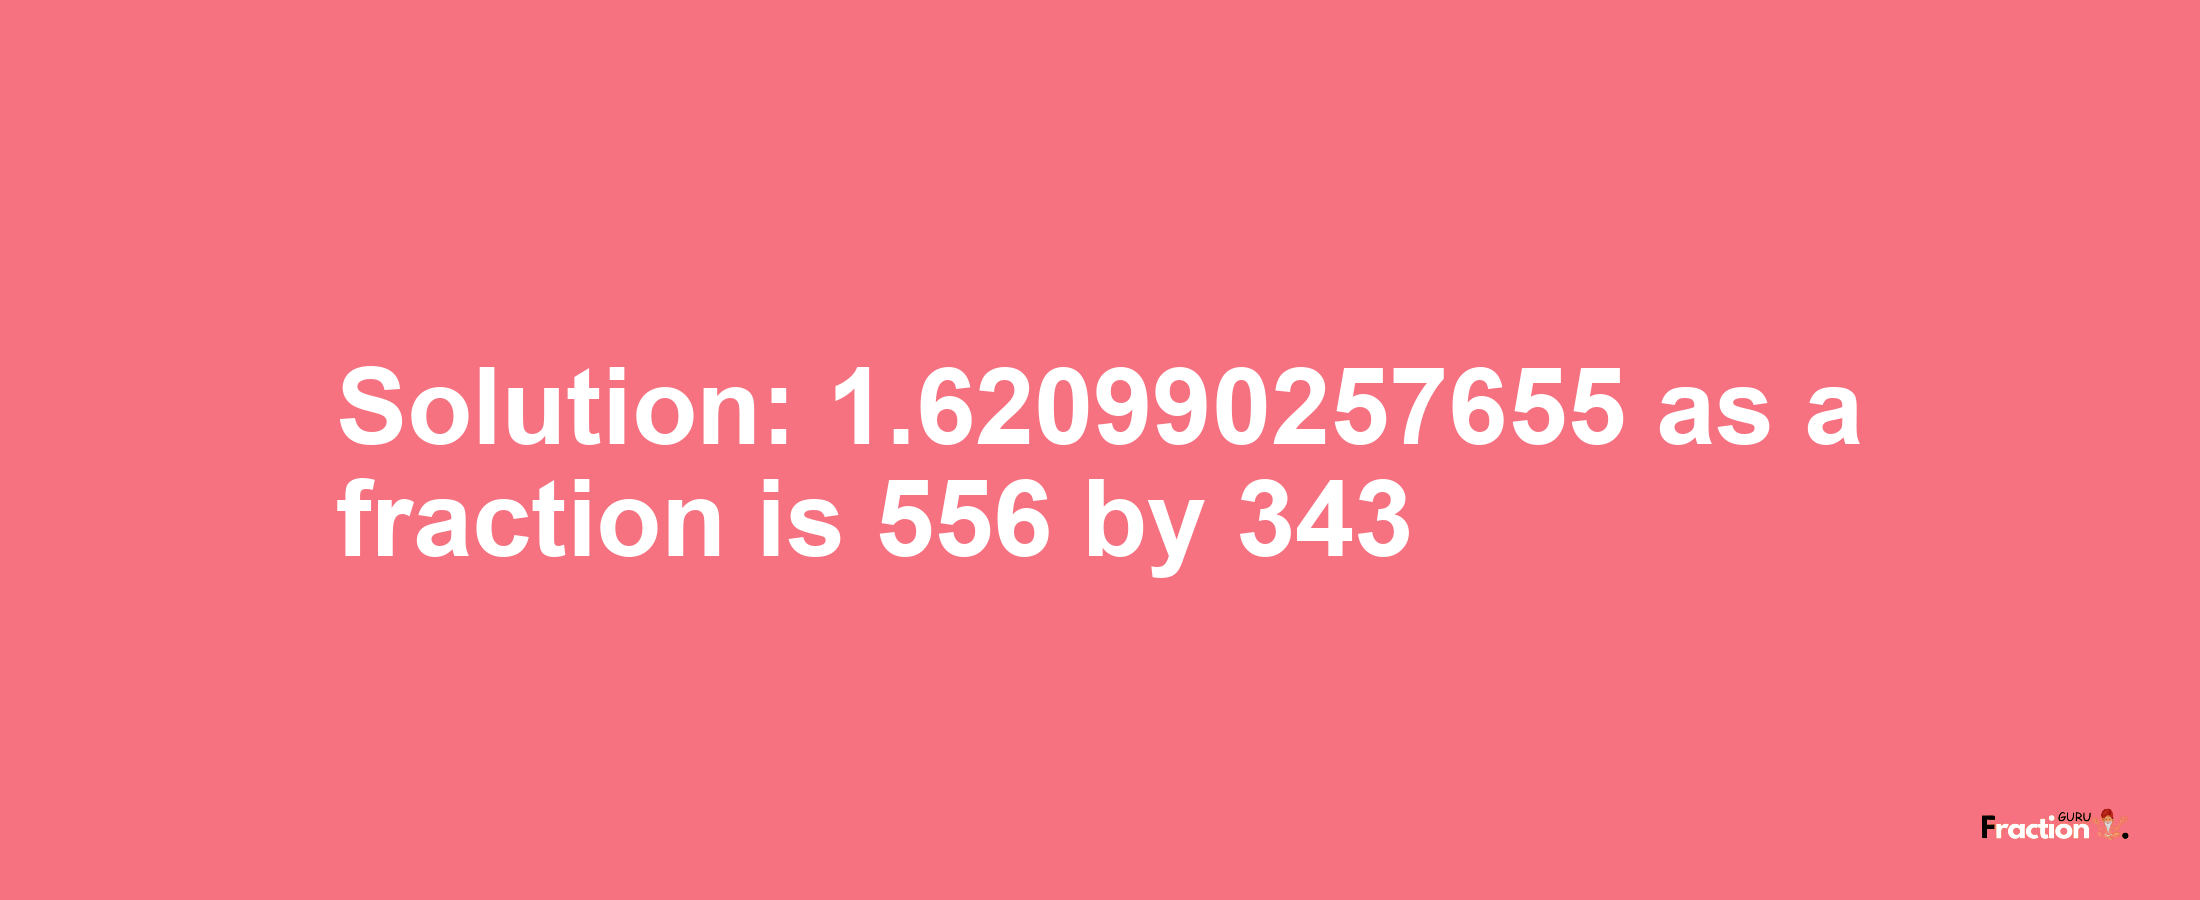 Solution:1.620990257655 as a fraction is 556/343